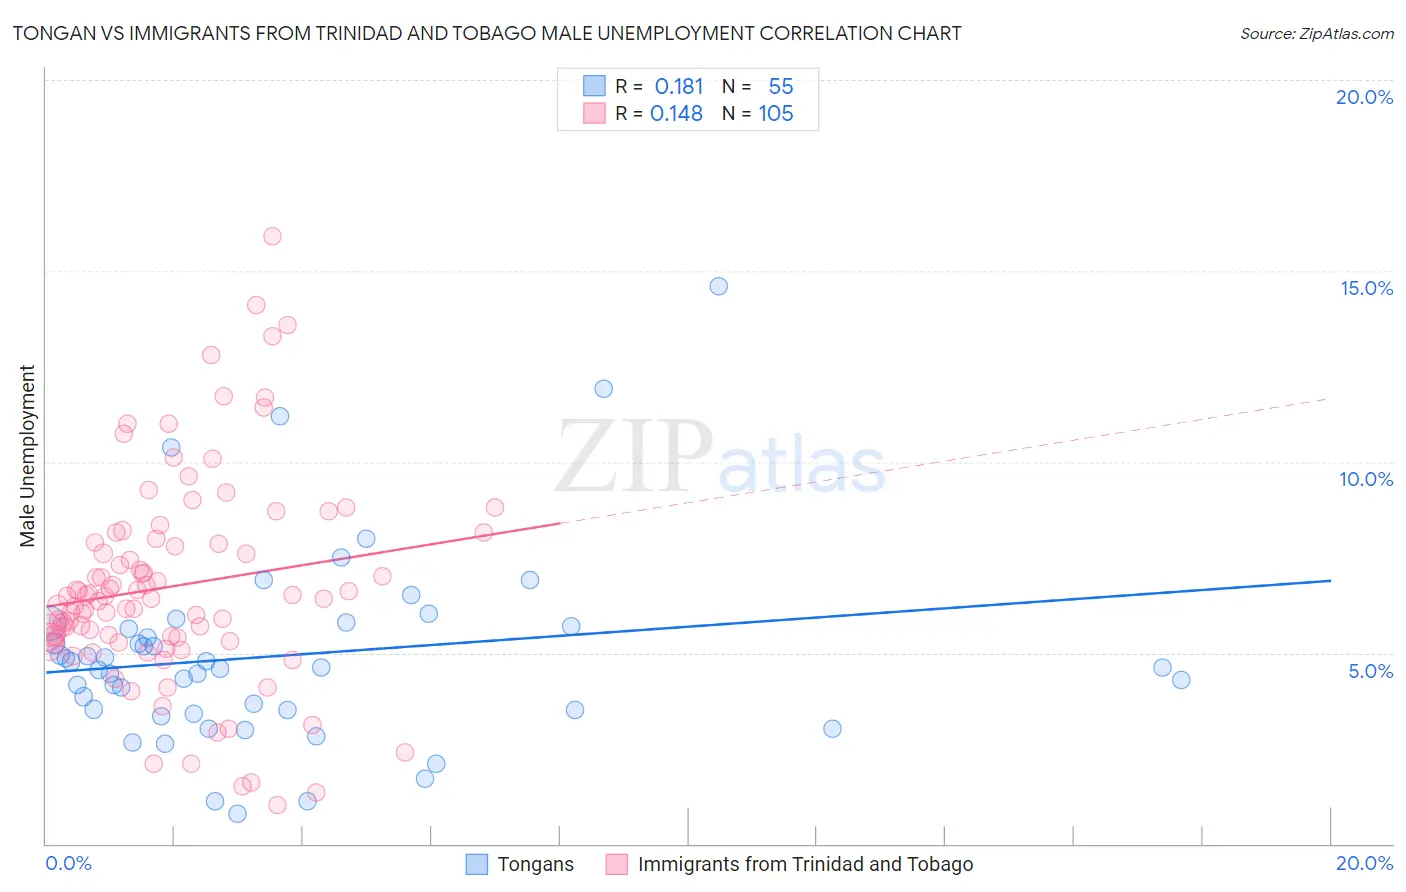 Tongan vs Immigrants from Trinidad and Tobago Male Unemployment